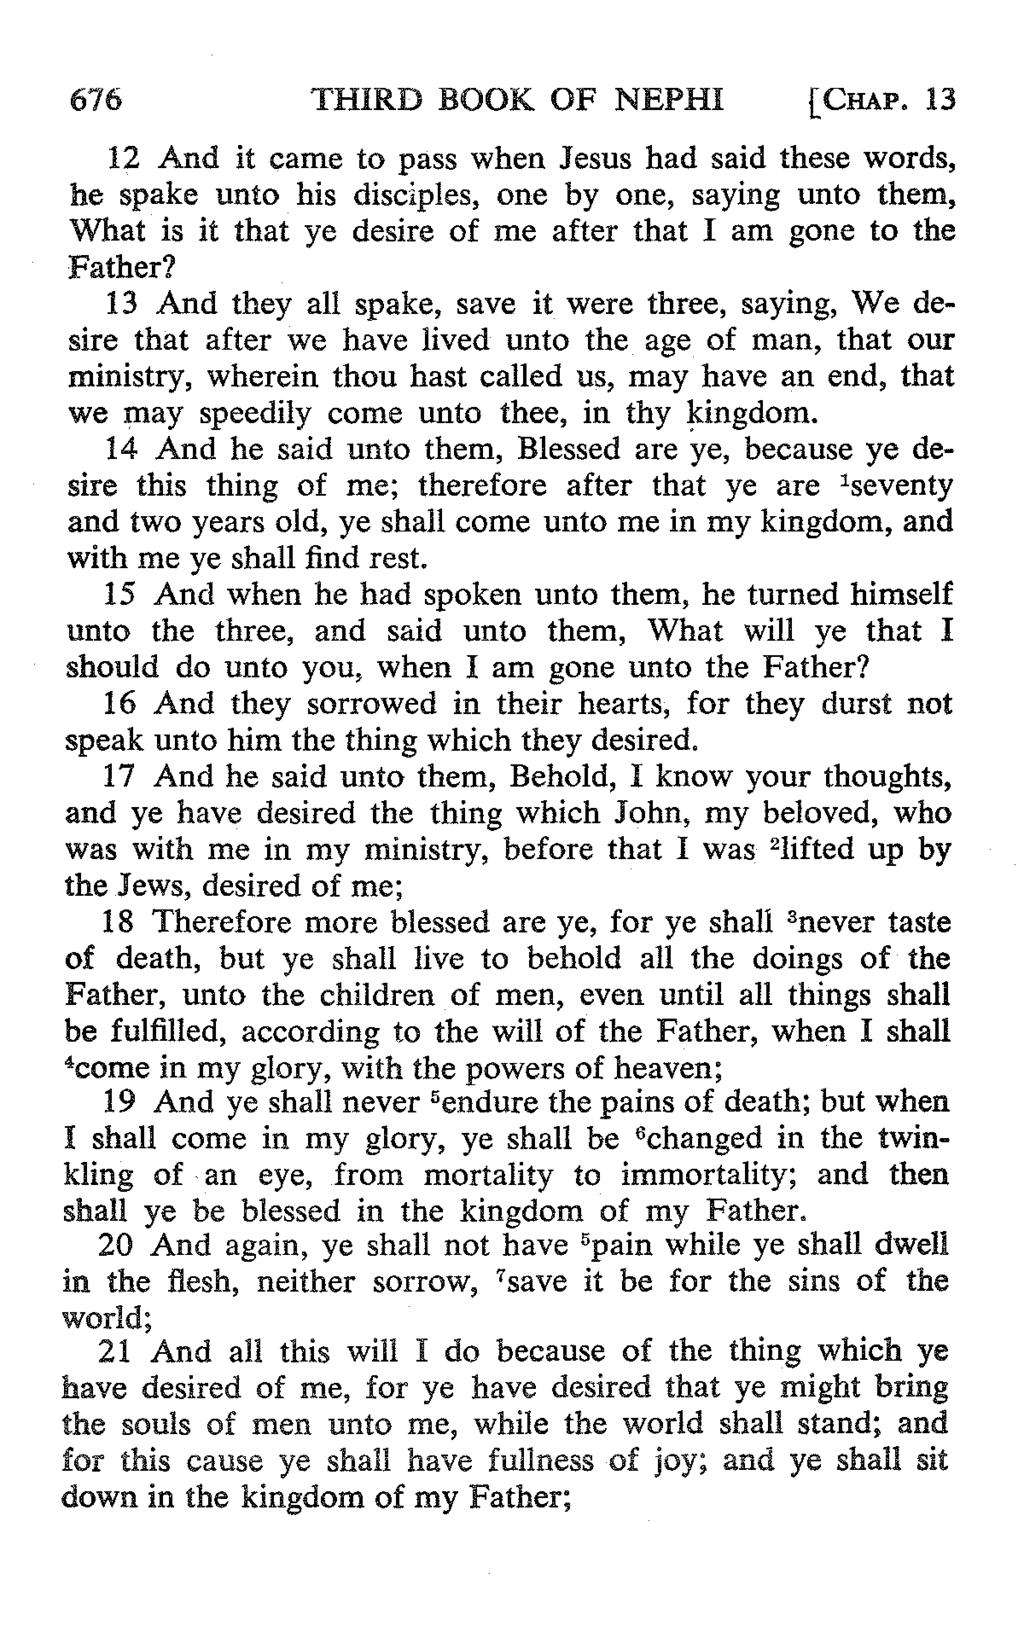 676 THIRD BOOK OF NEPHI (CHAP.